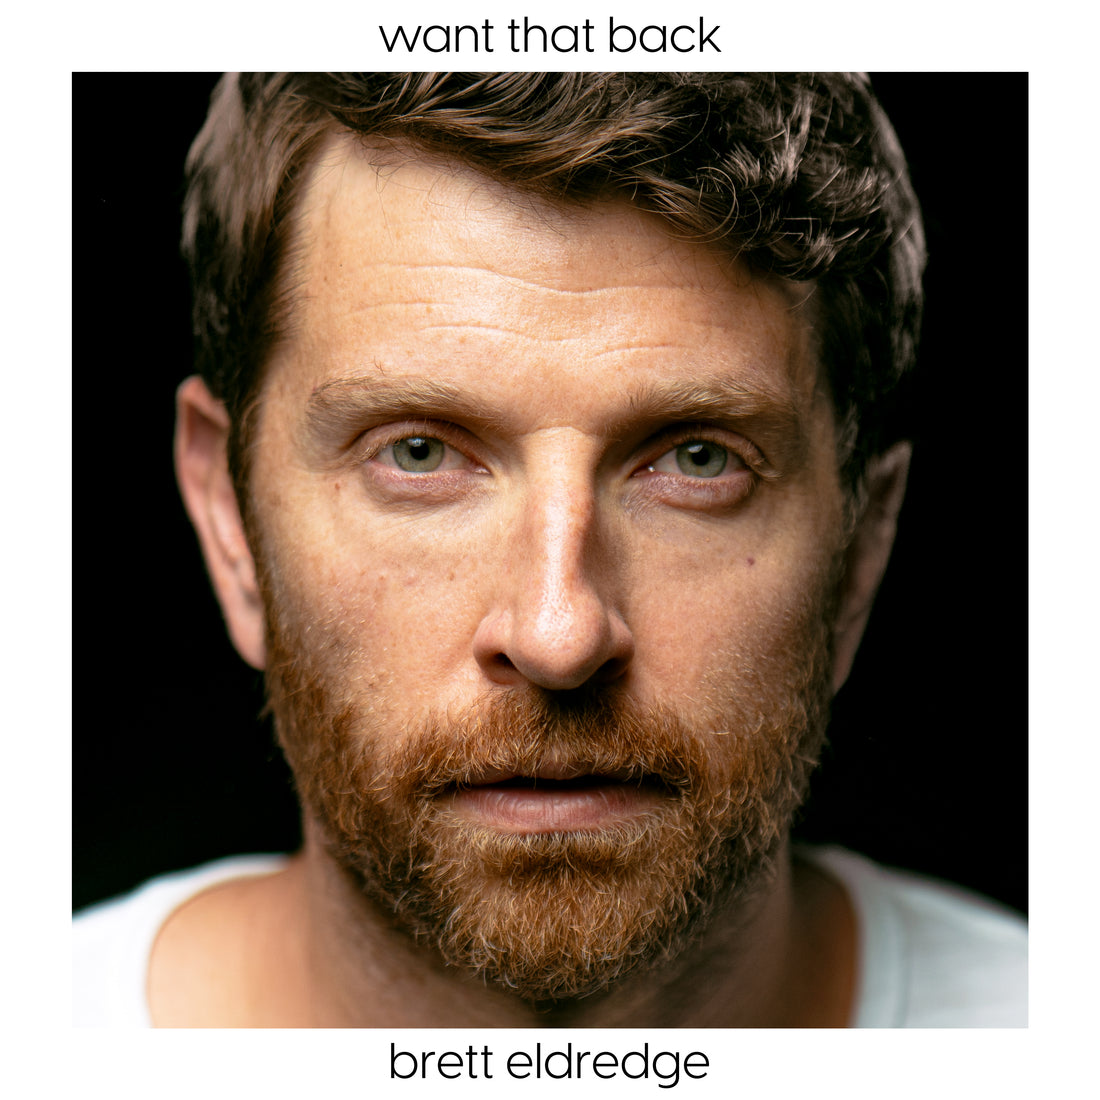 Brett Eldredge Longs For Life’s Simple Joys In New Song “Want That Back” Out Now